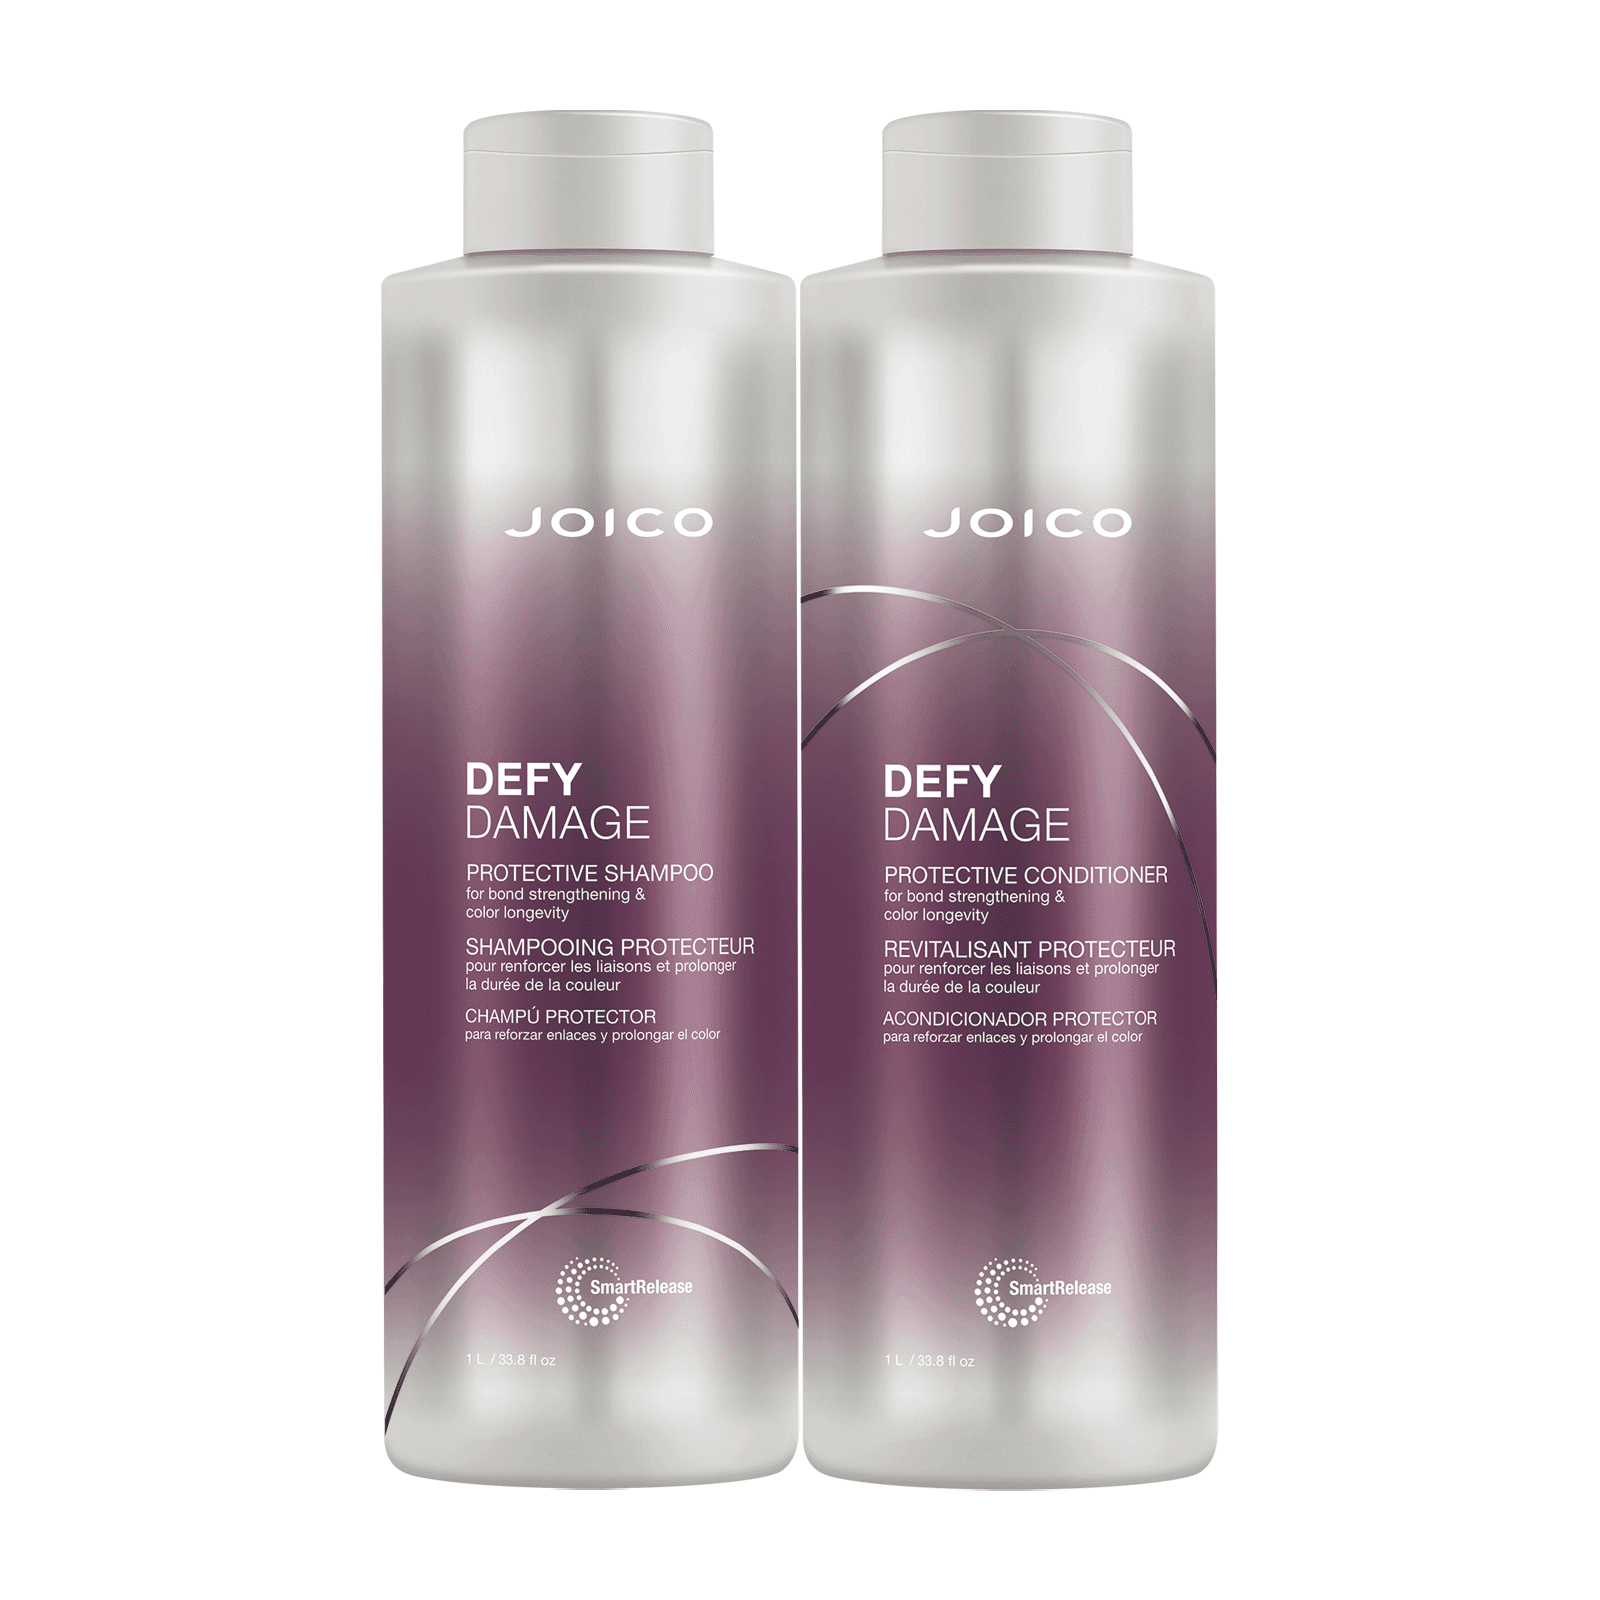 Joico Defy Damage Protective Shampoo and Conditioner 33.8 oz Liter Duo